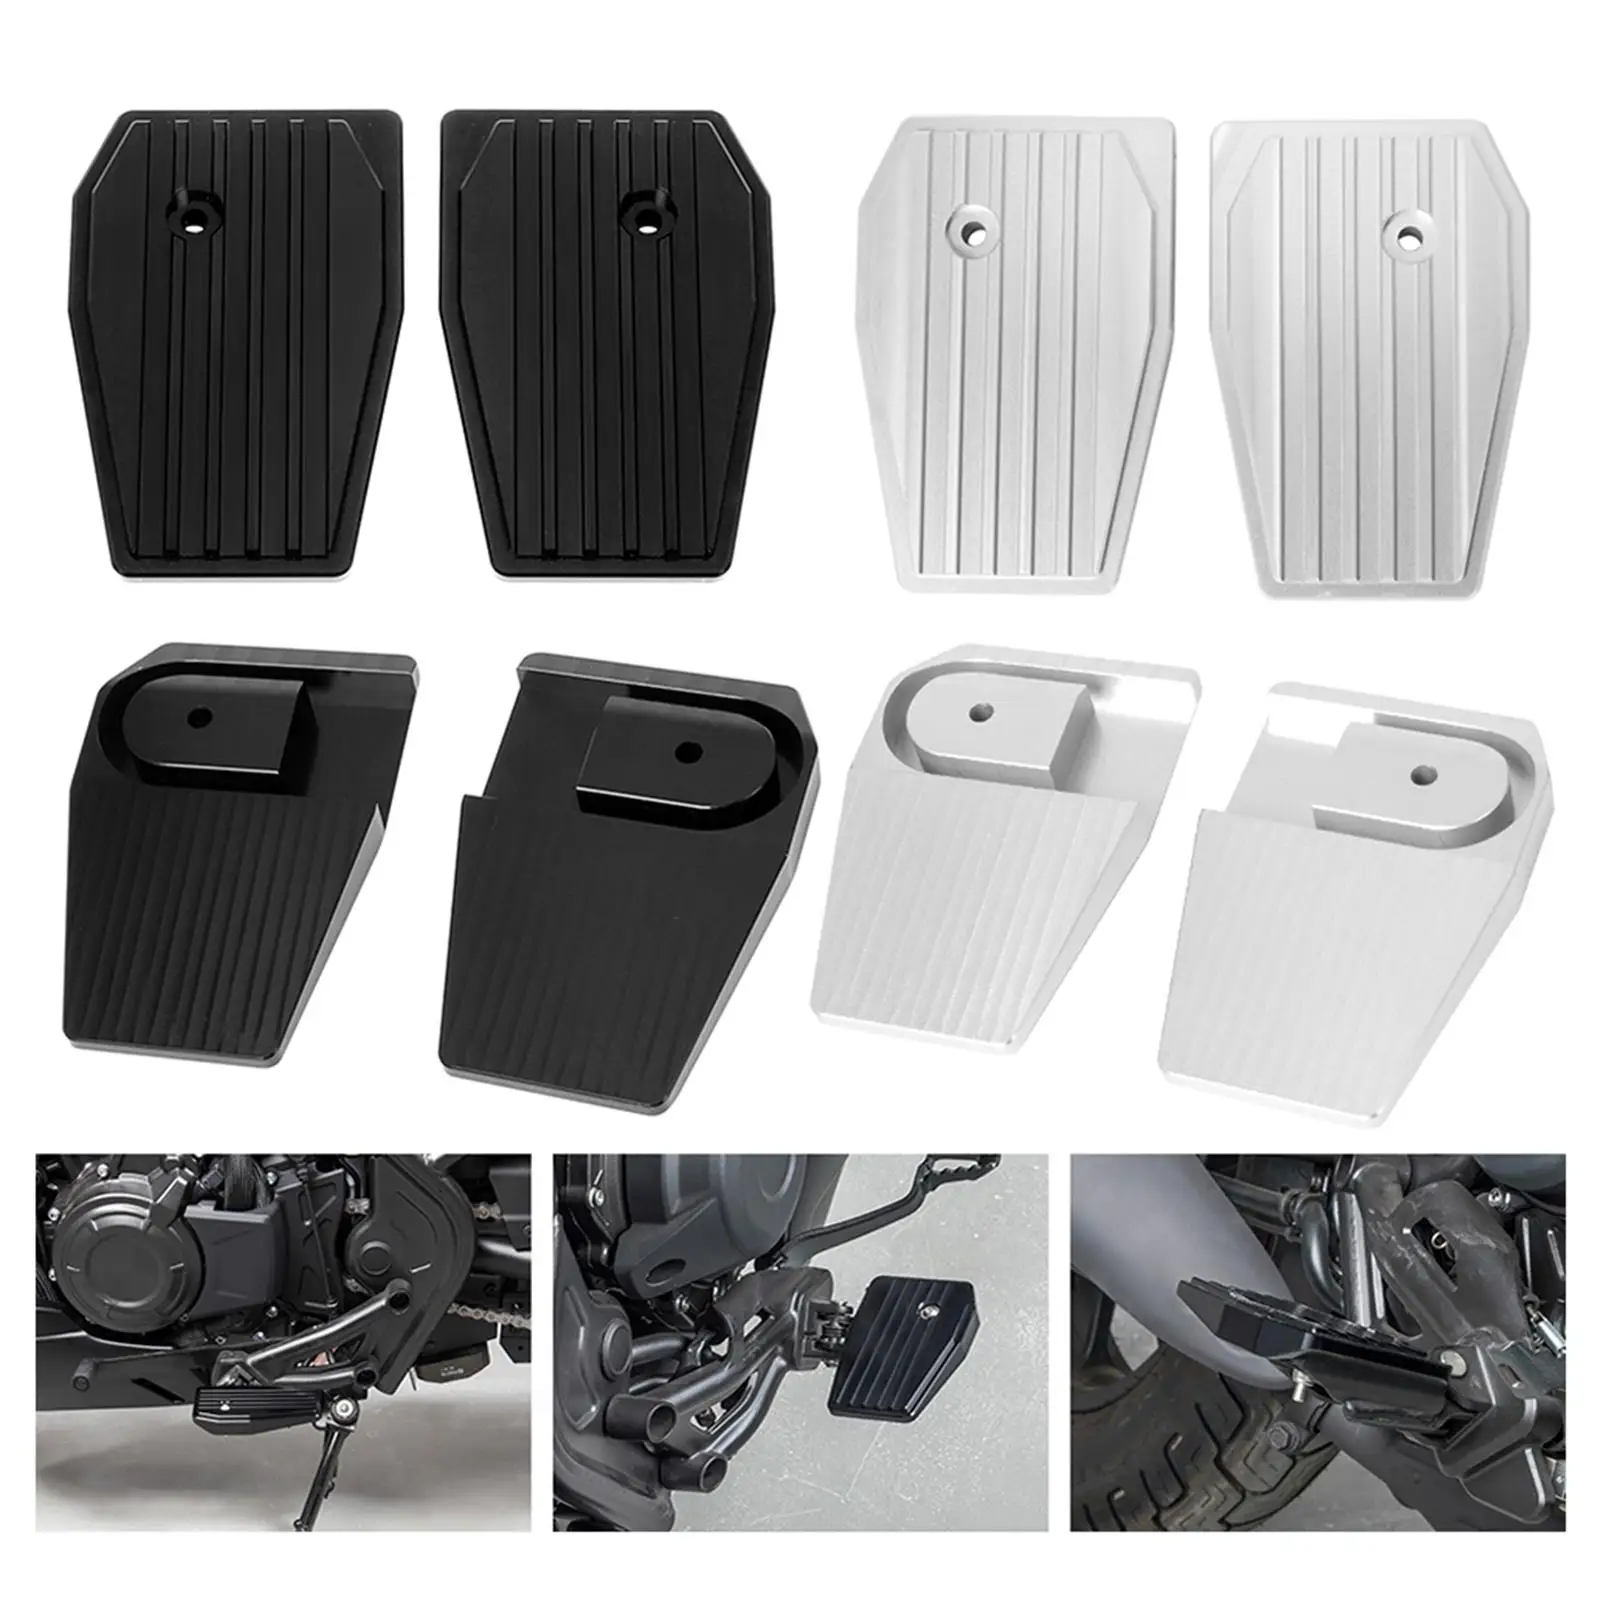 1 Pair of Motorcycle Pedals Footpegs Wide Rest Pedal Pad Footpegs Fit for CMX300 2017